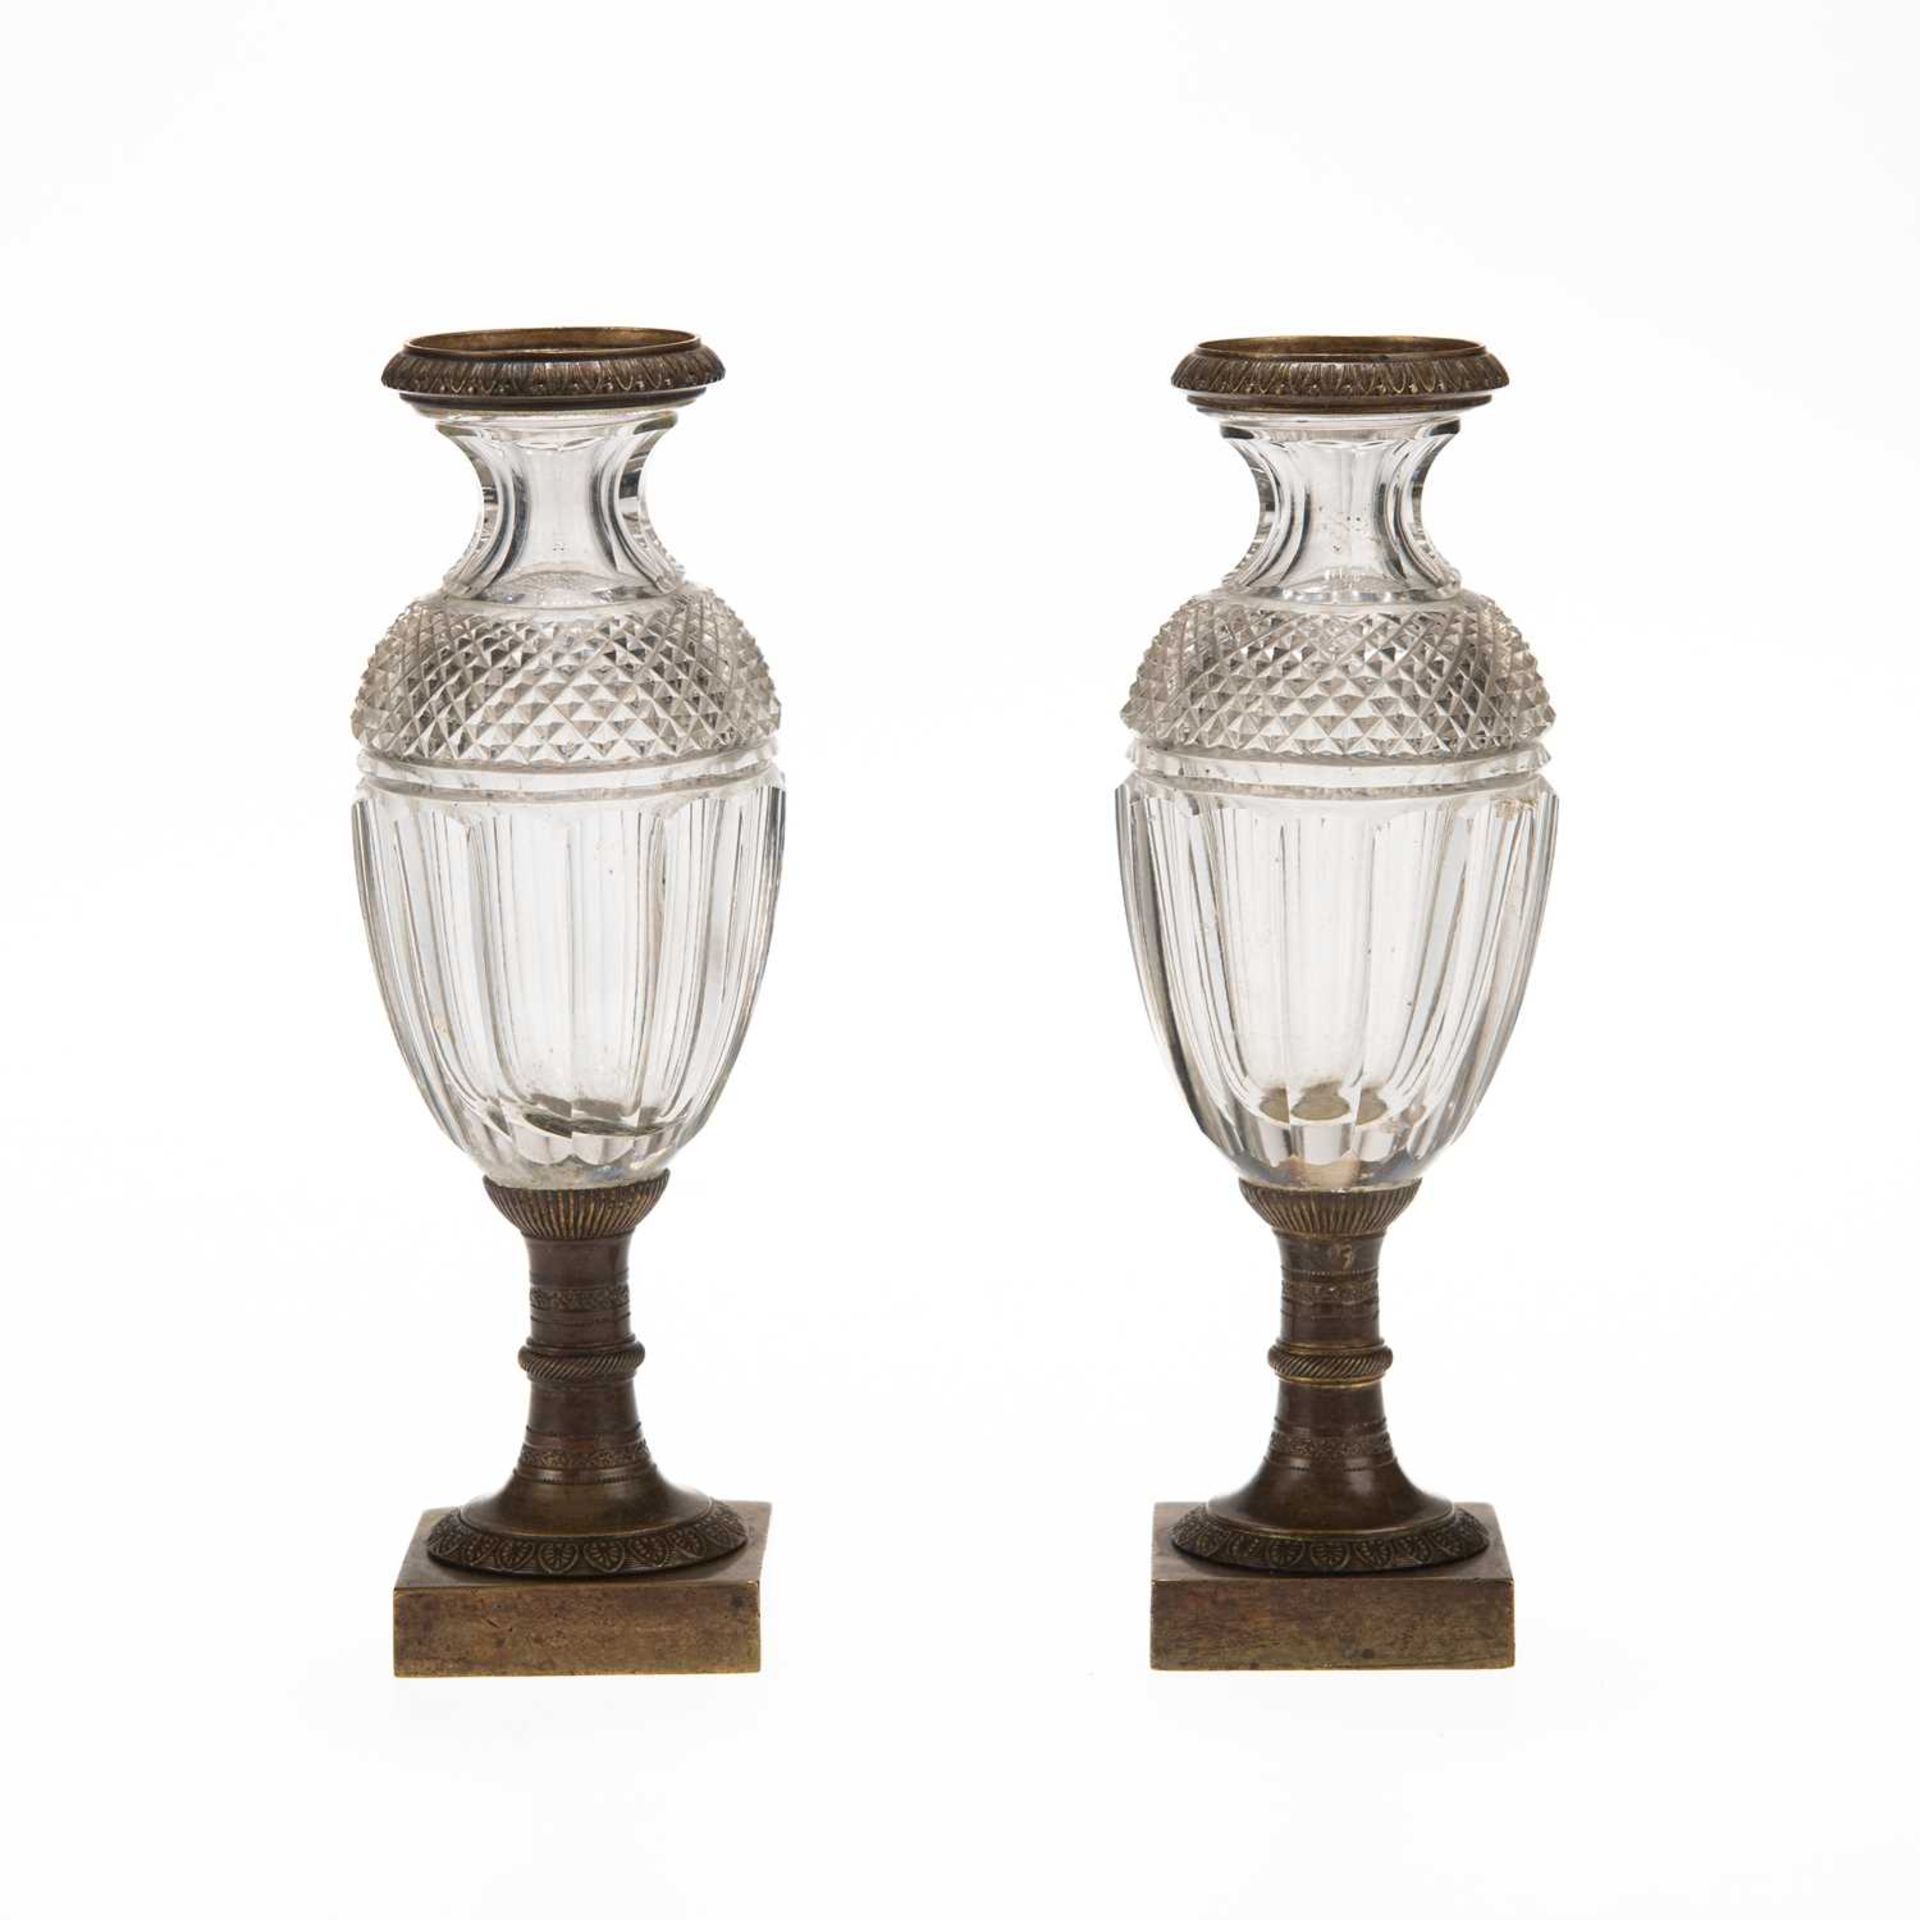 A PAIR OF GILT-METAL MOUNTED CUT-GLASS VASES, CIRCA 1900